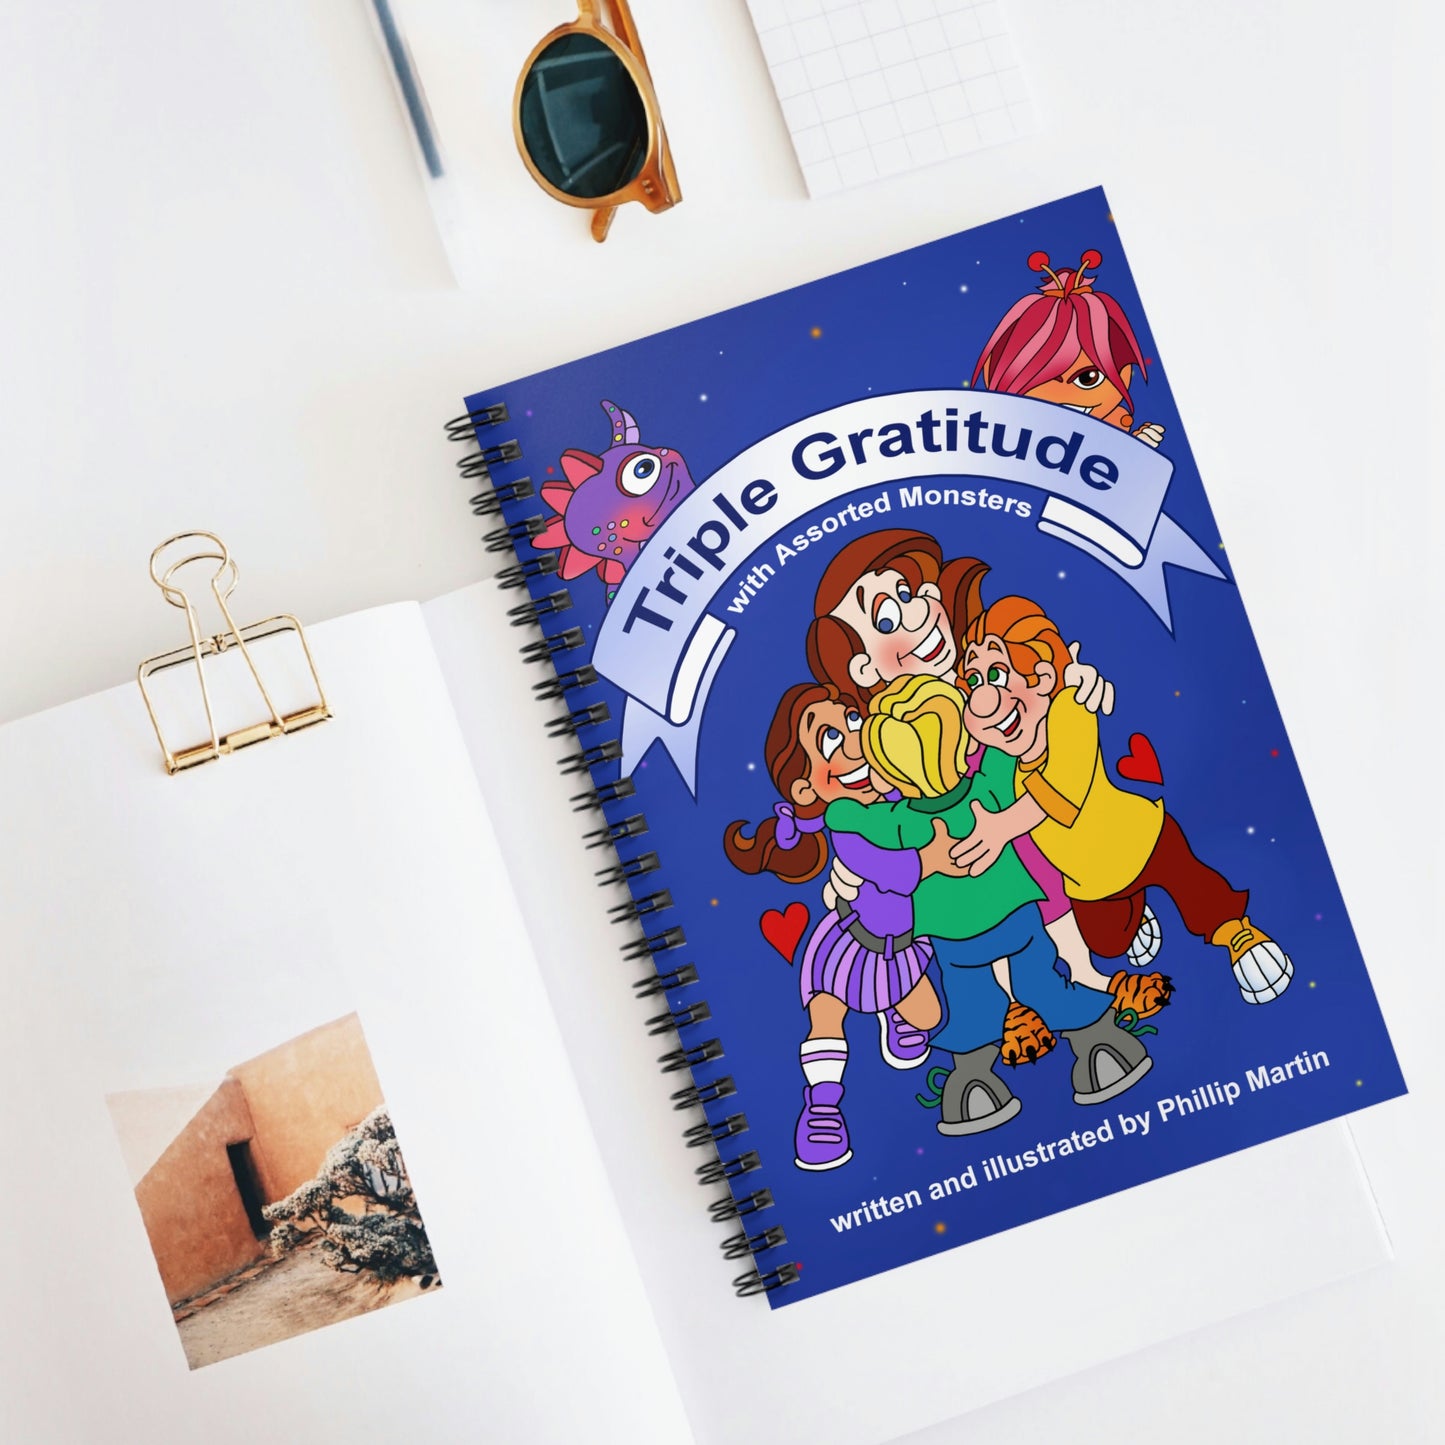 Triple Gratitude with Assorted Monsters Spiral Notebook - Ruled Line